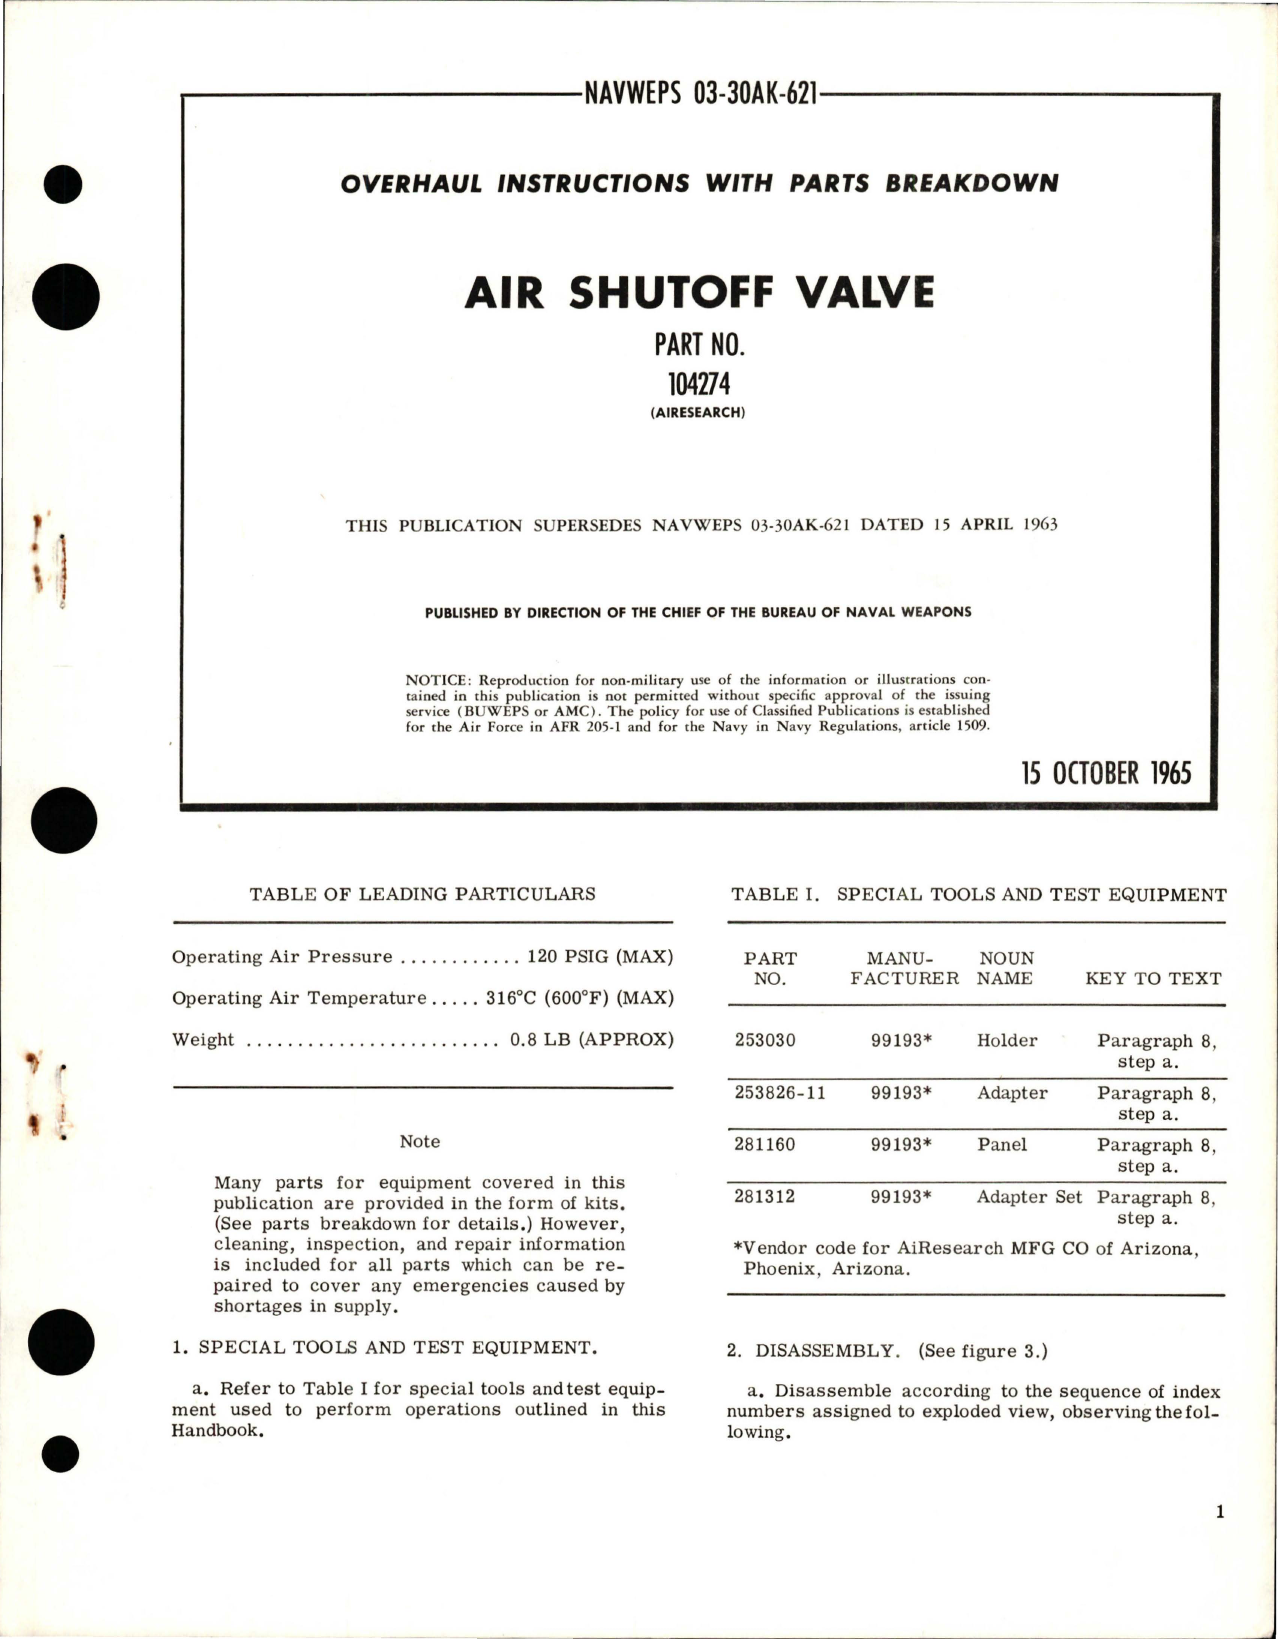 Sample page 1 from AirCorps Library document: Overhaul Instructions with Parts Breakdown for Air Shutoff Valve - Part 104274